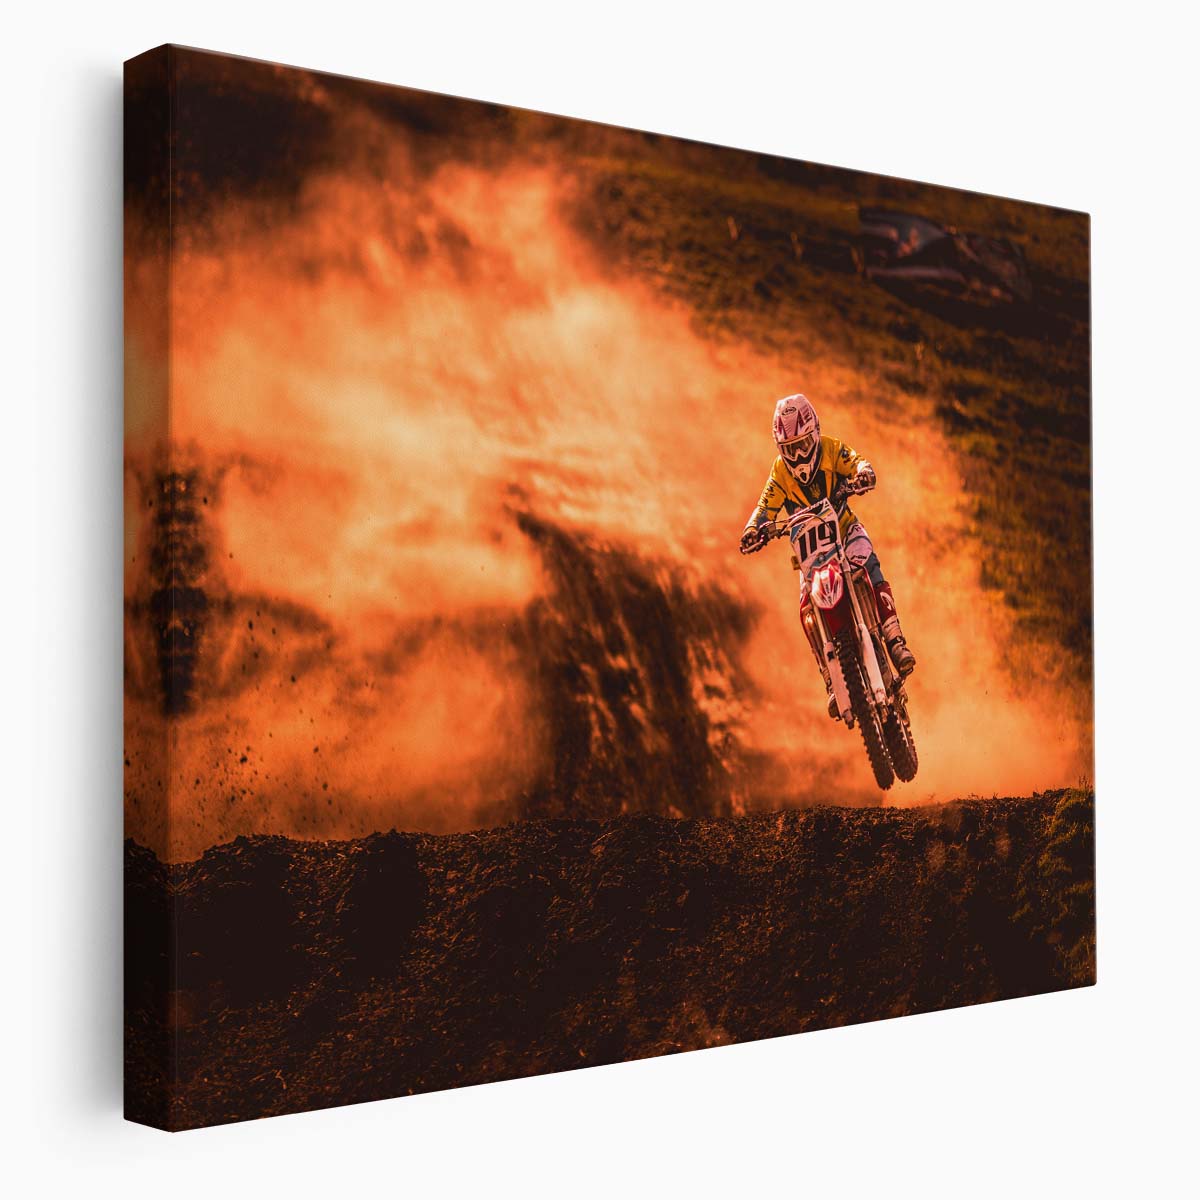 Motocross Mastery Extreme Race & Flight Wall Art by Luxuriance Designs. Made in USA.